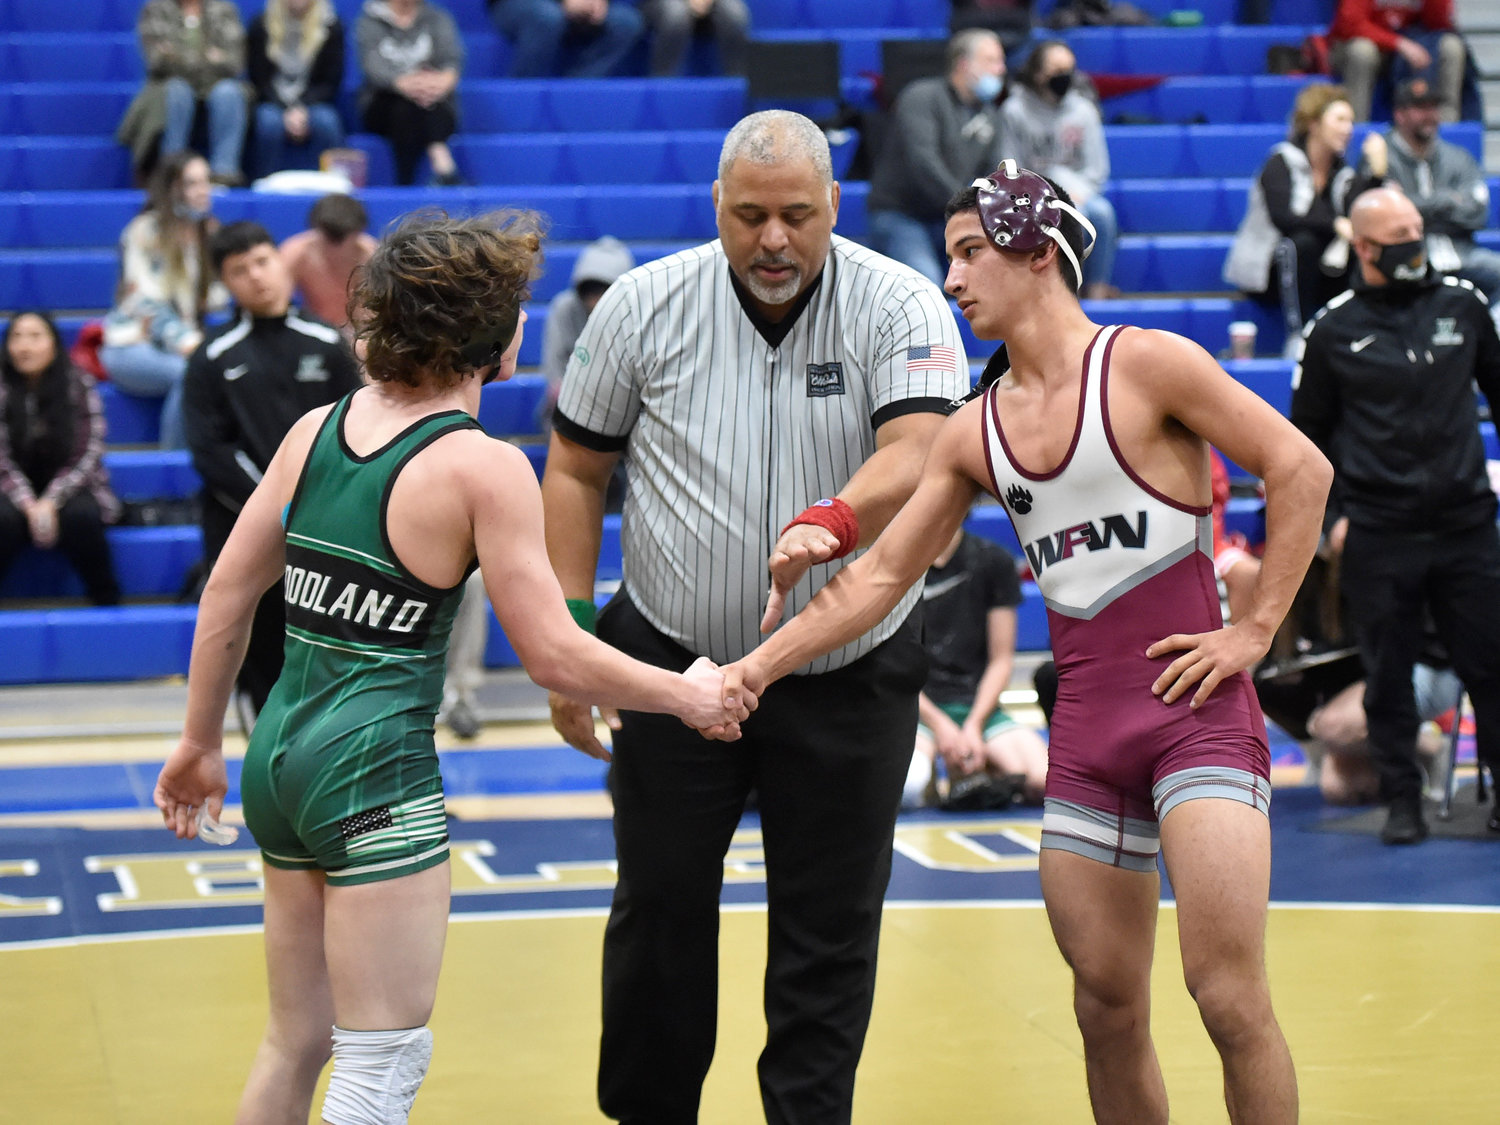 W.F. West’s Bo Davis shakes hand with a Woodland wrestler after beating him by decision on Wednesday, Dec. 8, at Kelso High School.